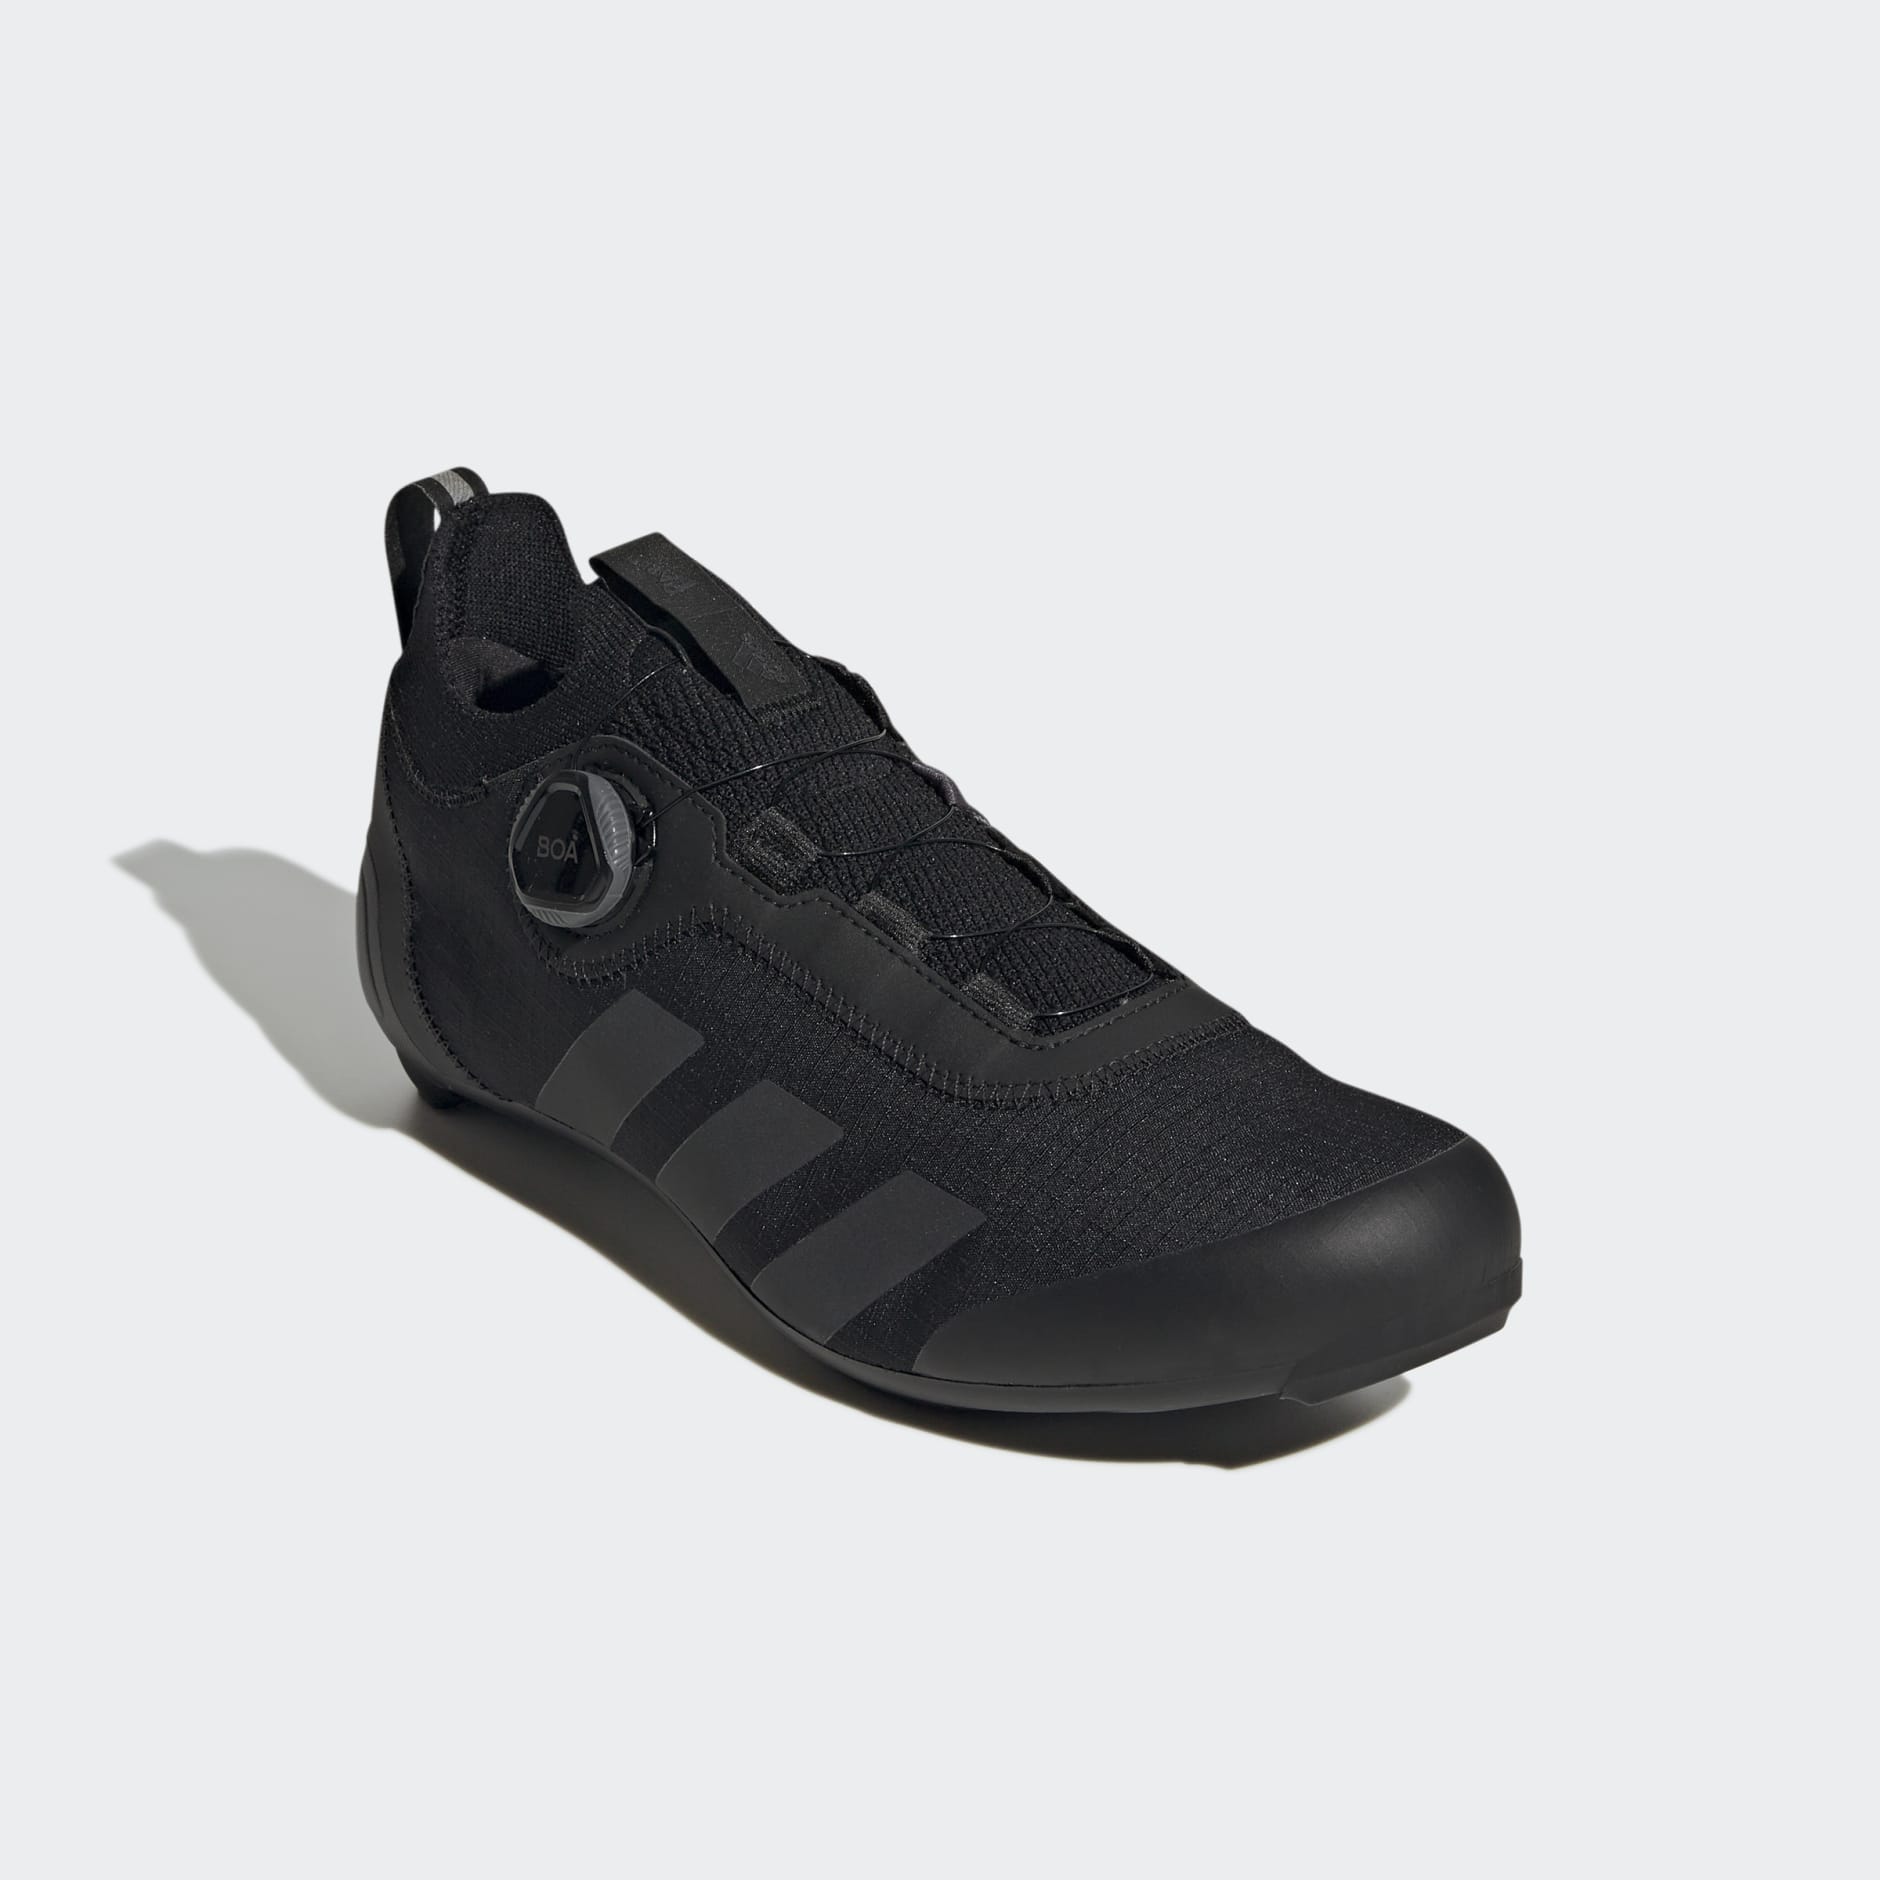 The Parley Road Cycling BOAÂ® Shoes